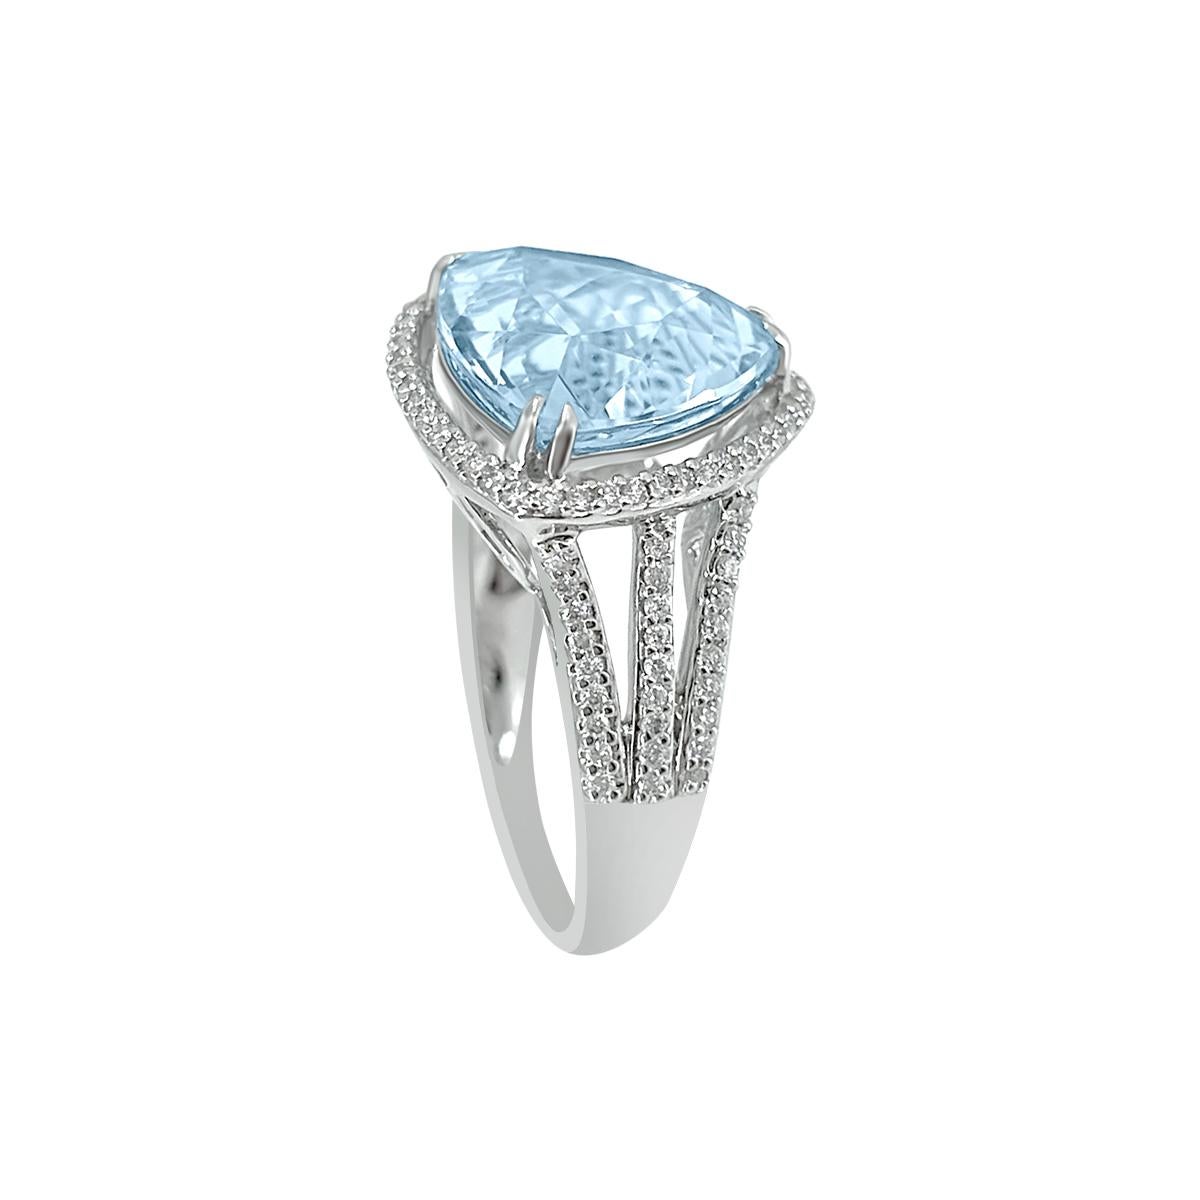 The Trillion Aquamarine Of 5.61Cts, Clawed With 3 Sides Is Neatly Fixed On The White Band Of 14K.
The Gemstone Is So Beautifully Carved That Every Cuts And Corners Seems Flawless.
It Can Be Beautifully Paired Up With Any Gorgeous Evening Wear